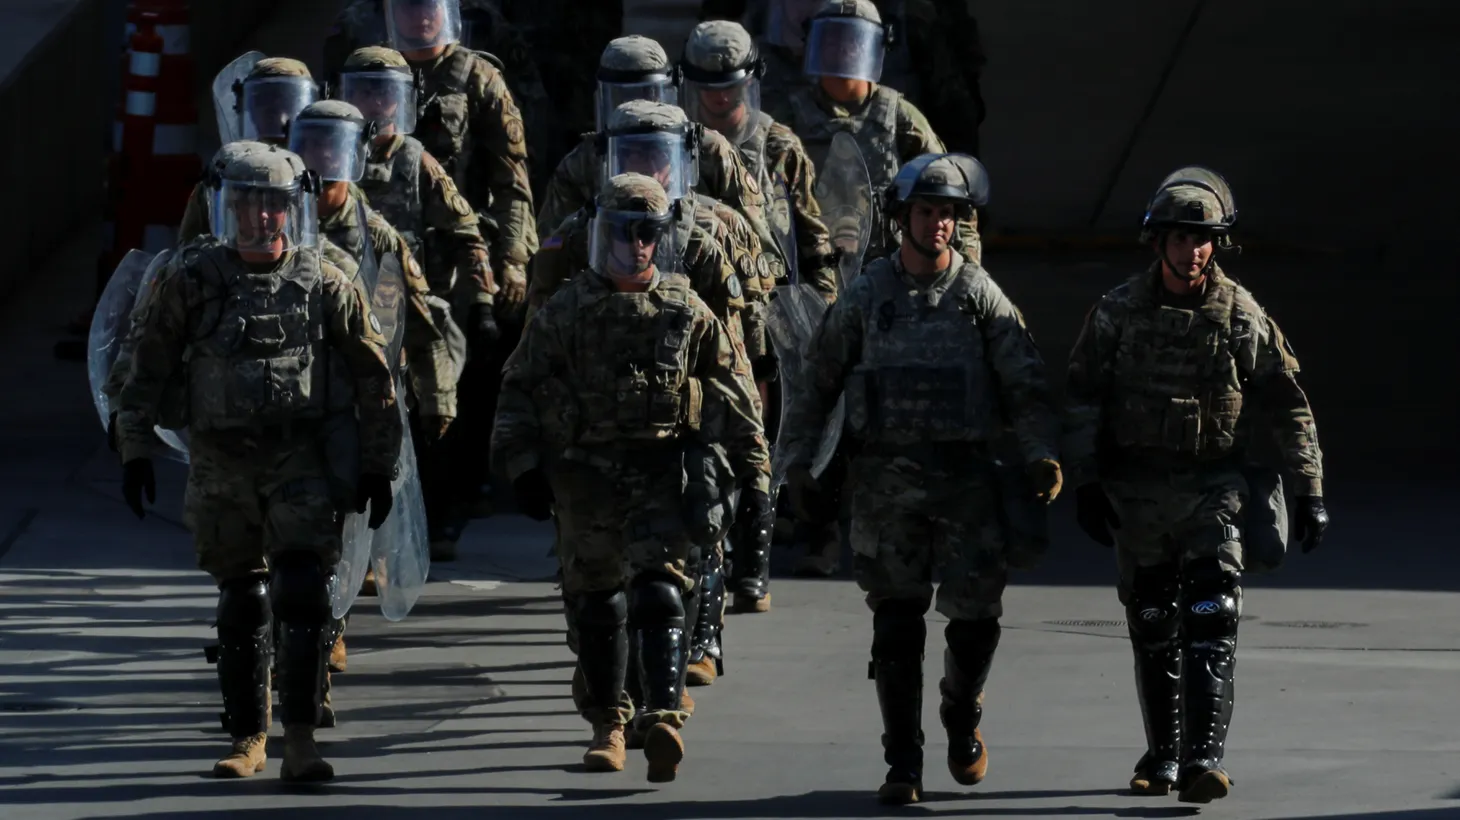 U.S. Military troops return from a test deployment with U.S. Customs and Border Protection agents after conducting a large-scale operational readiness exercise at the San Ysidro port of entry with Mexico in San Diego, California, U.S., January 10, 2019.